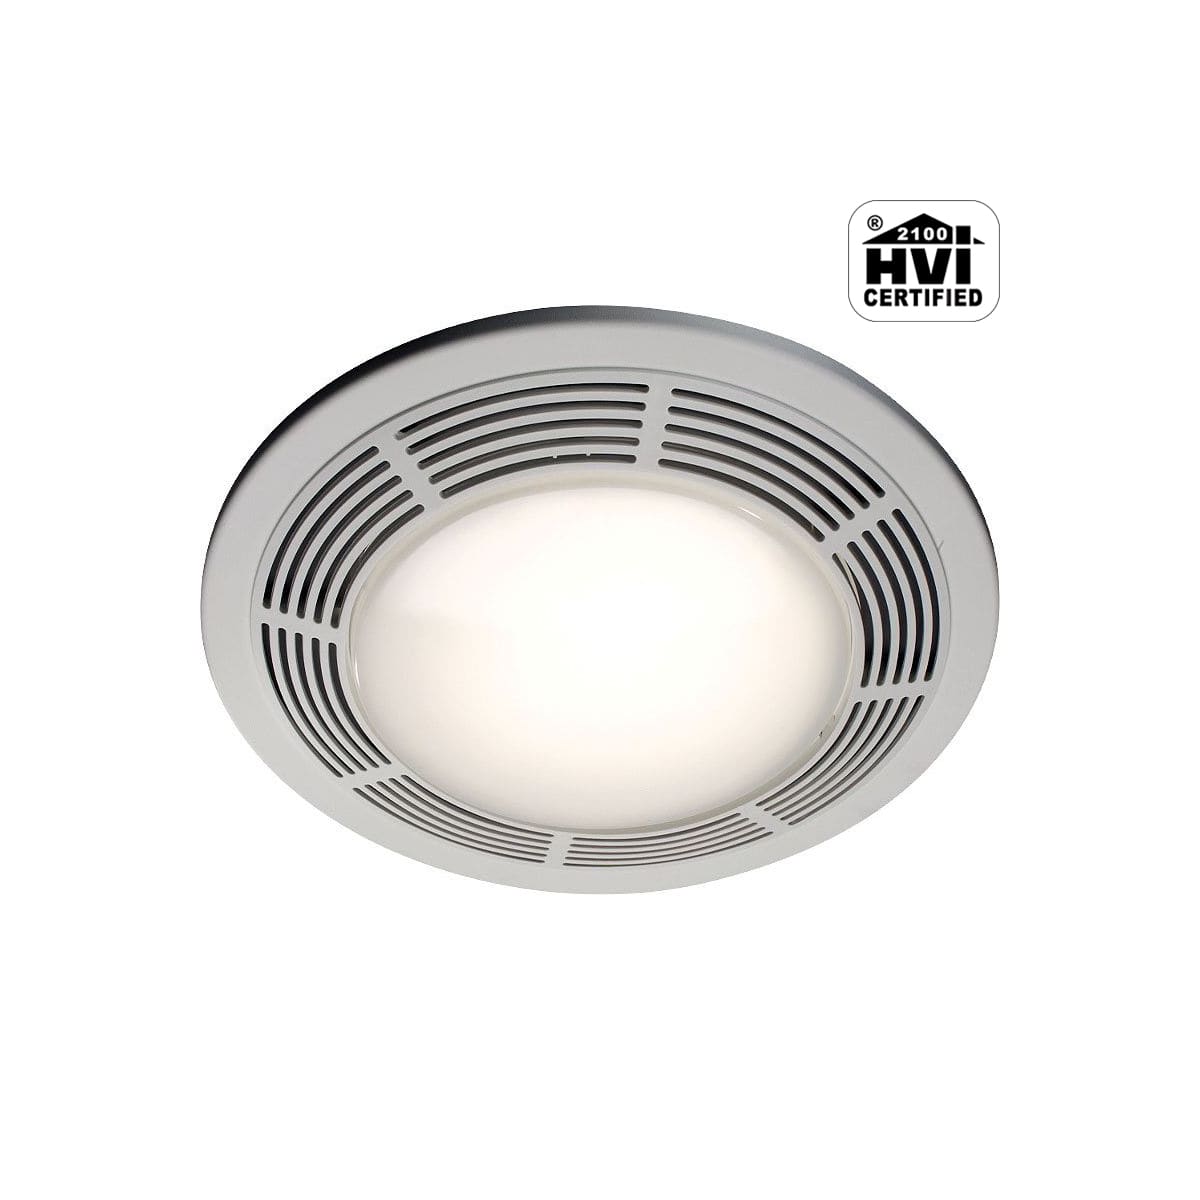 Ceiling Mounted Hvi Certified Bath Fan, How To Remove Bathroom Vent Light Cover